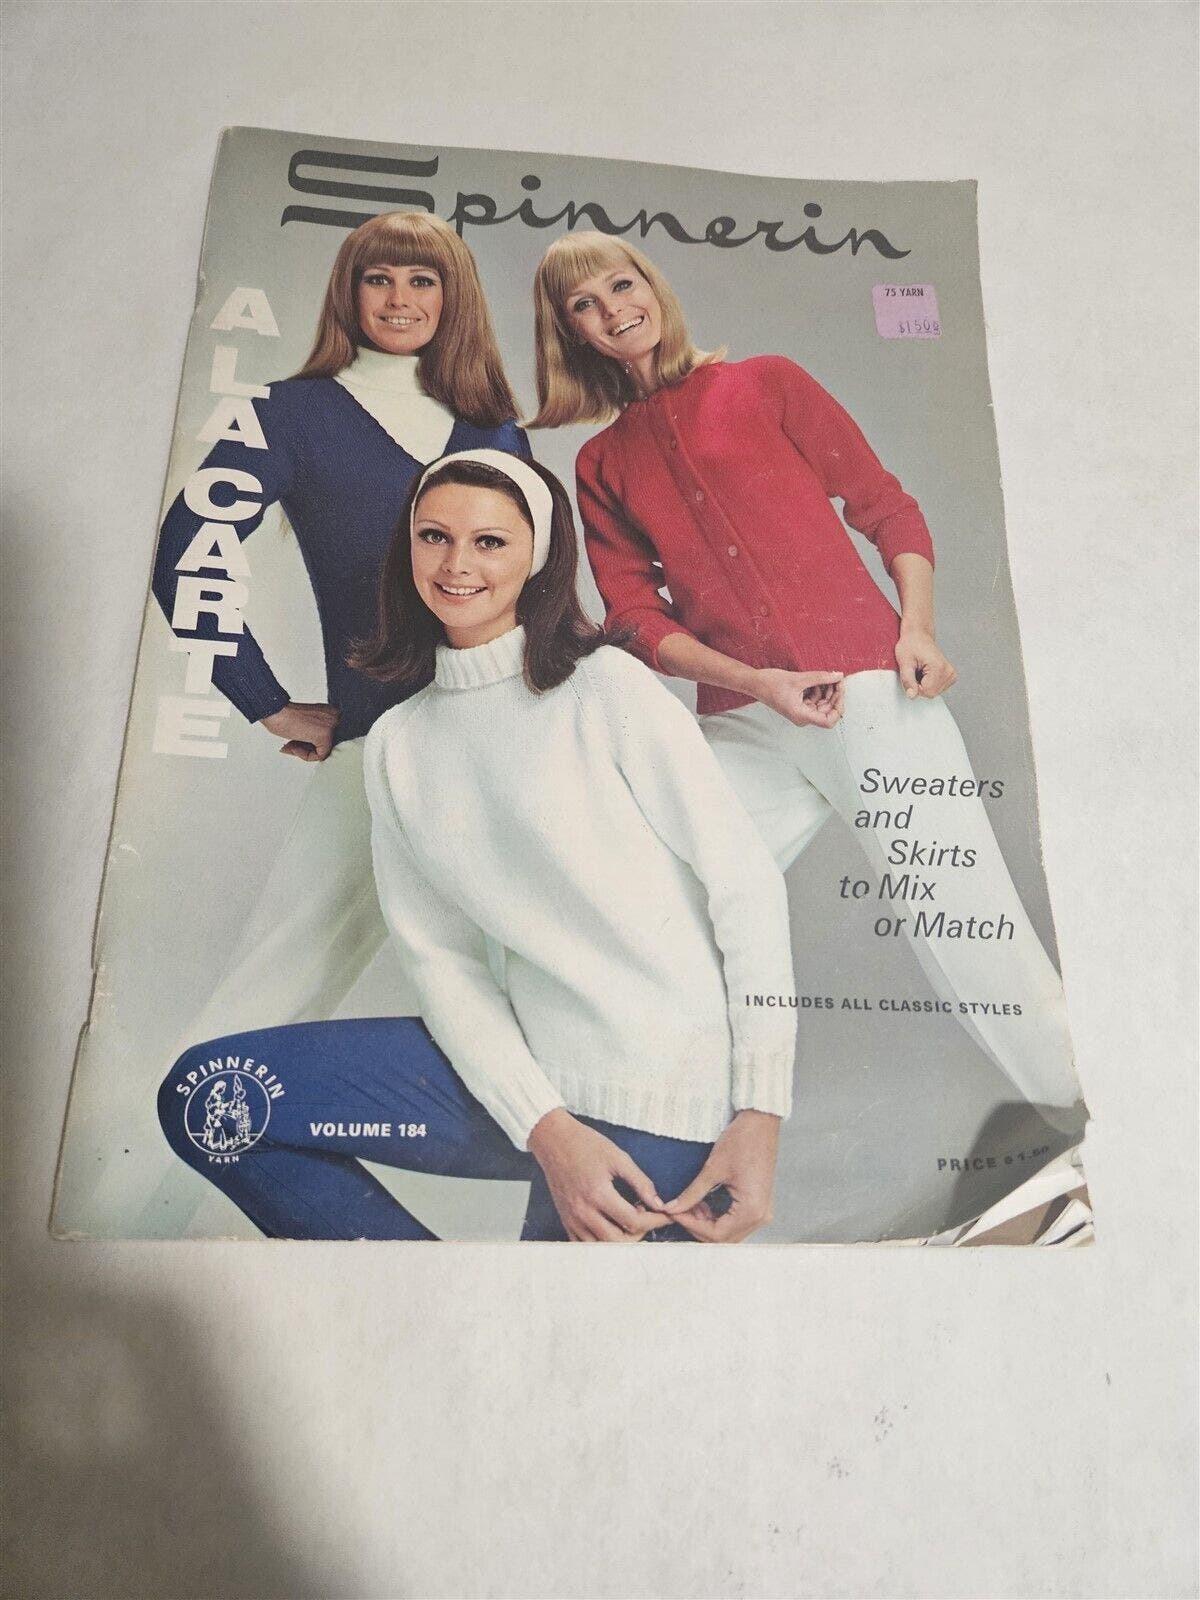 Spinnerin Ala Carte Sweaters and Skirts Vintage Knitting Volume 184 1968 - $8.98